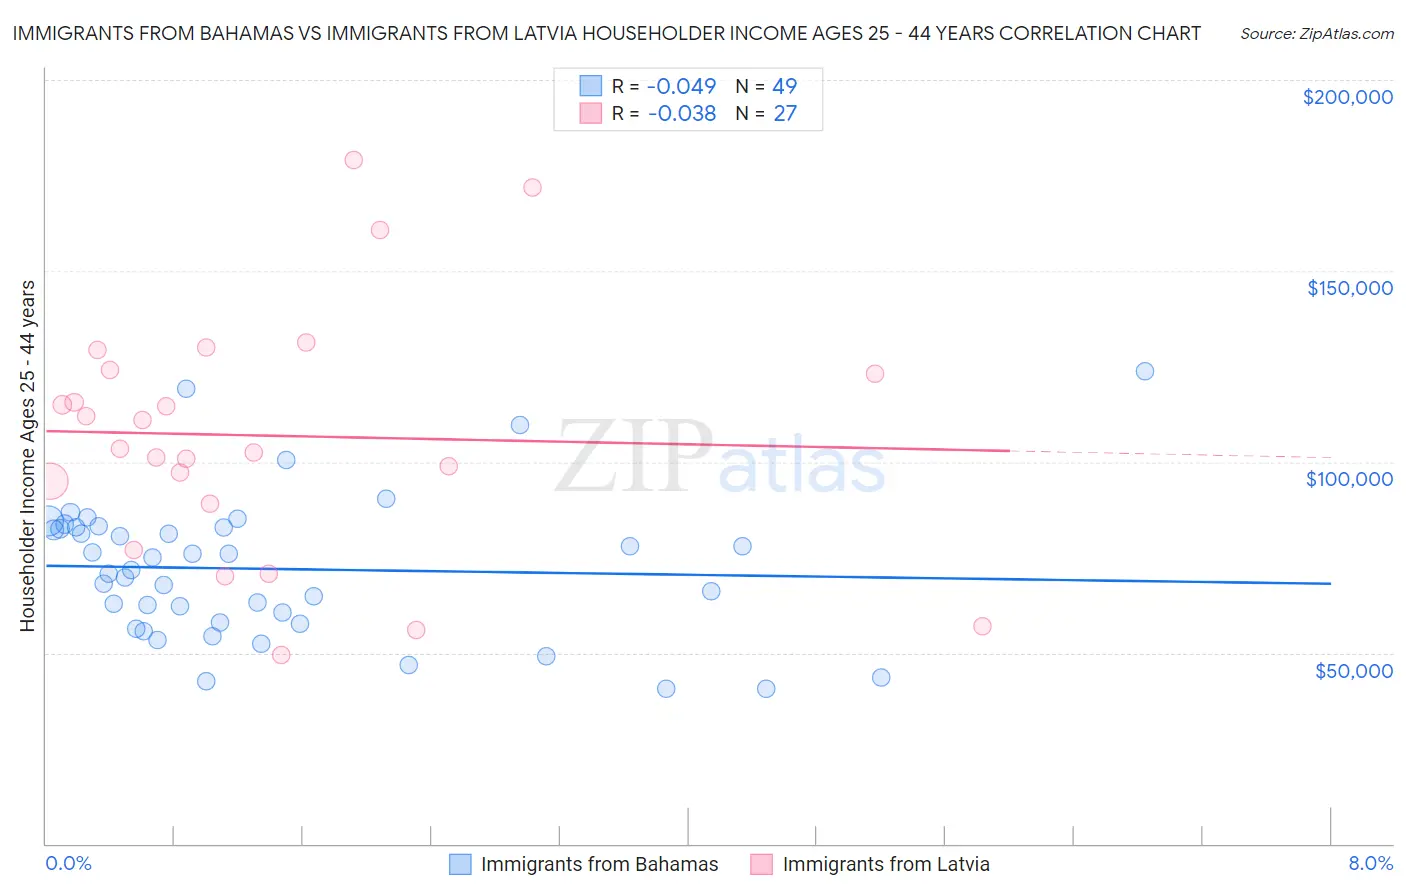 Immigrants from Bahamas vs Immigrants from Latvia Householder Income Ages 25 - 44 years